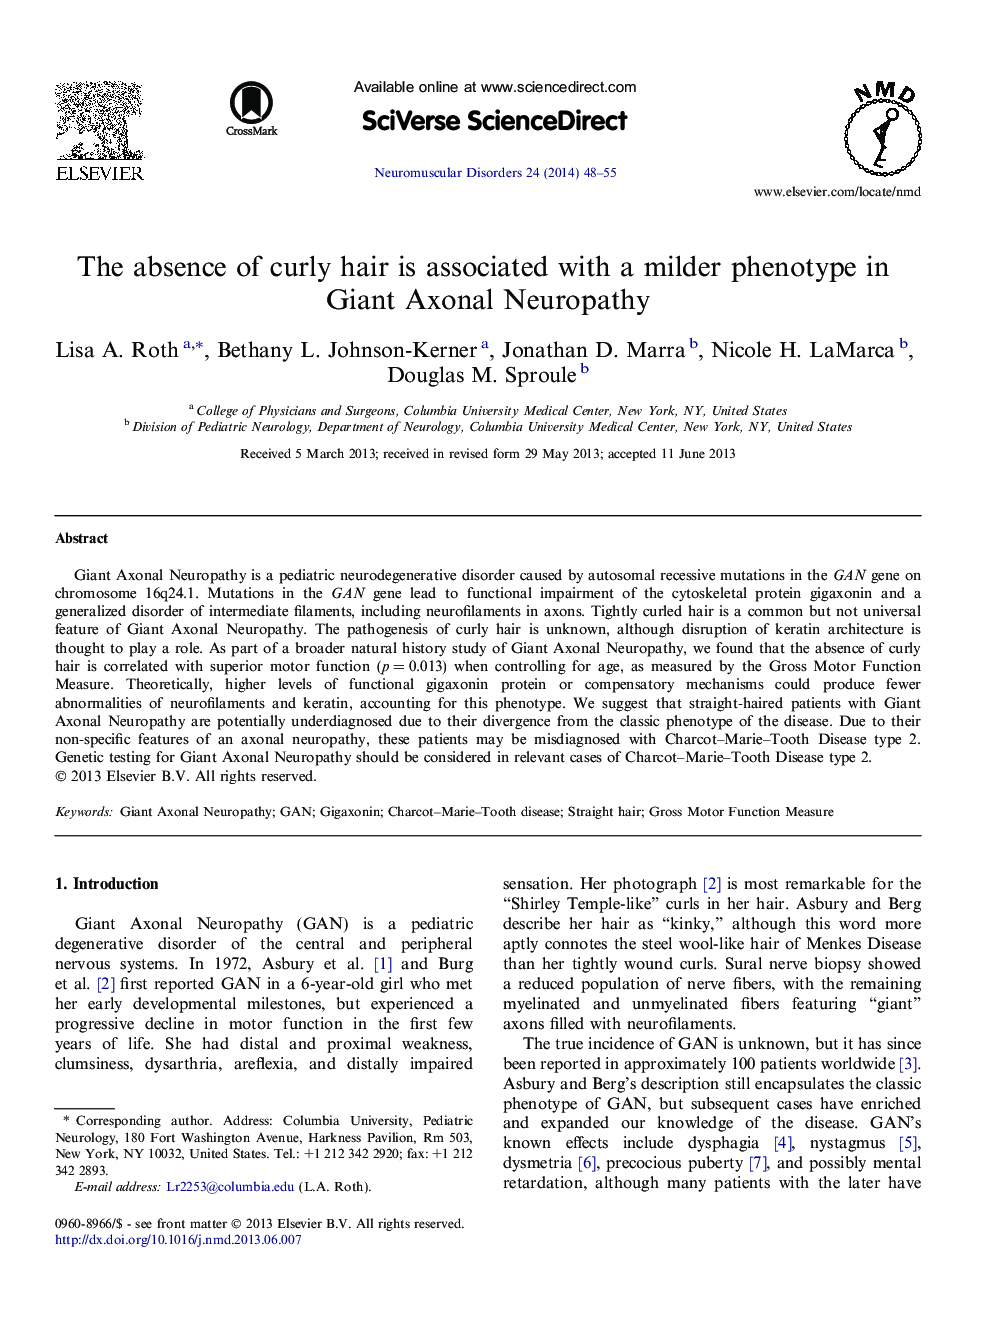 The absence of curly hair is associated with a milder phenotype in Giant Axonal Neuropathy